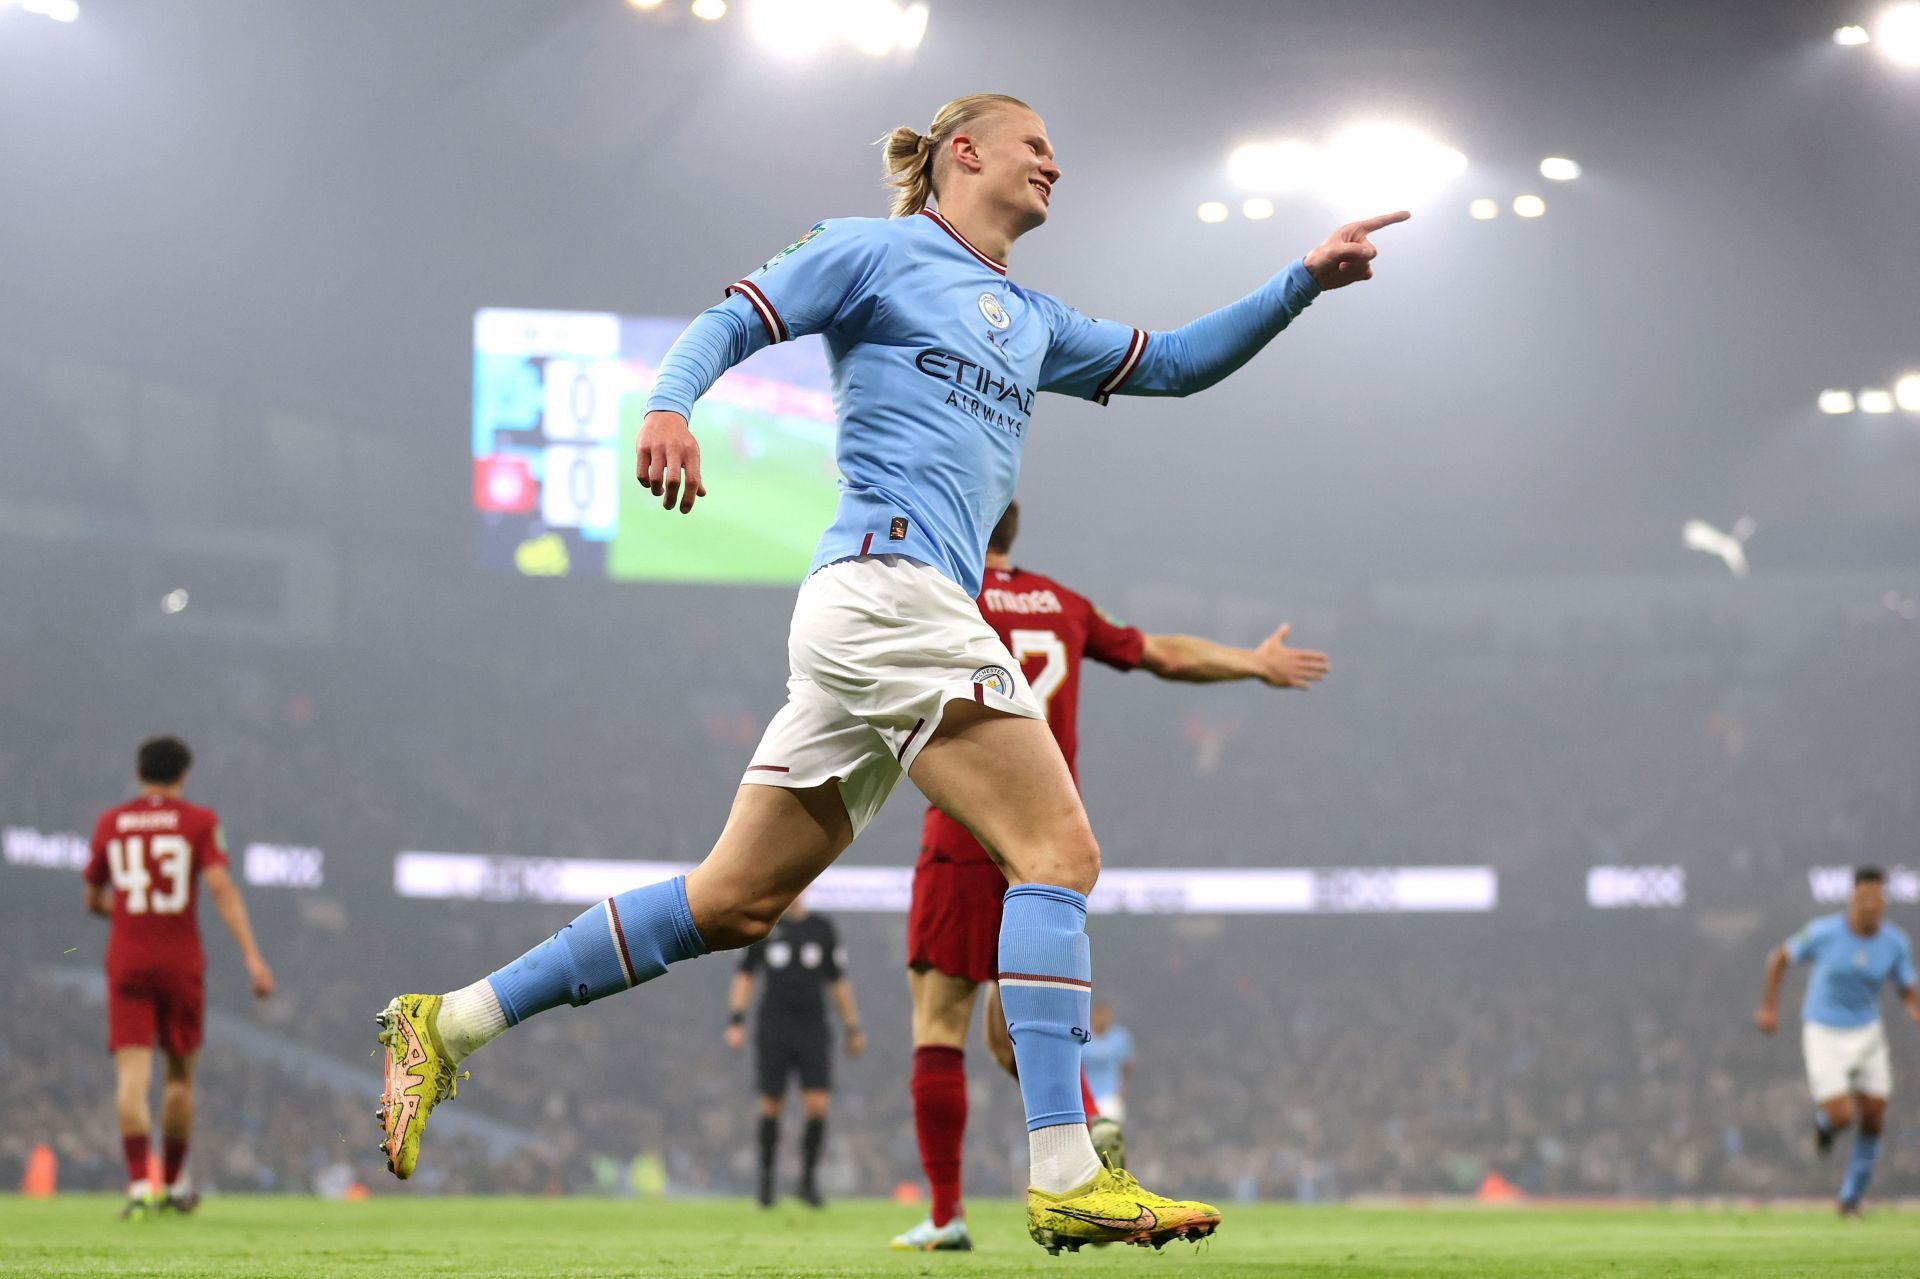 Erling Haaland marked his return with a goal for Manchester City versus Liverpool in the EFL Cup.